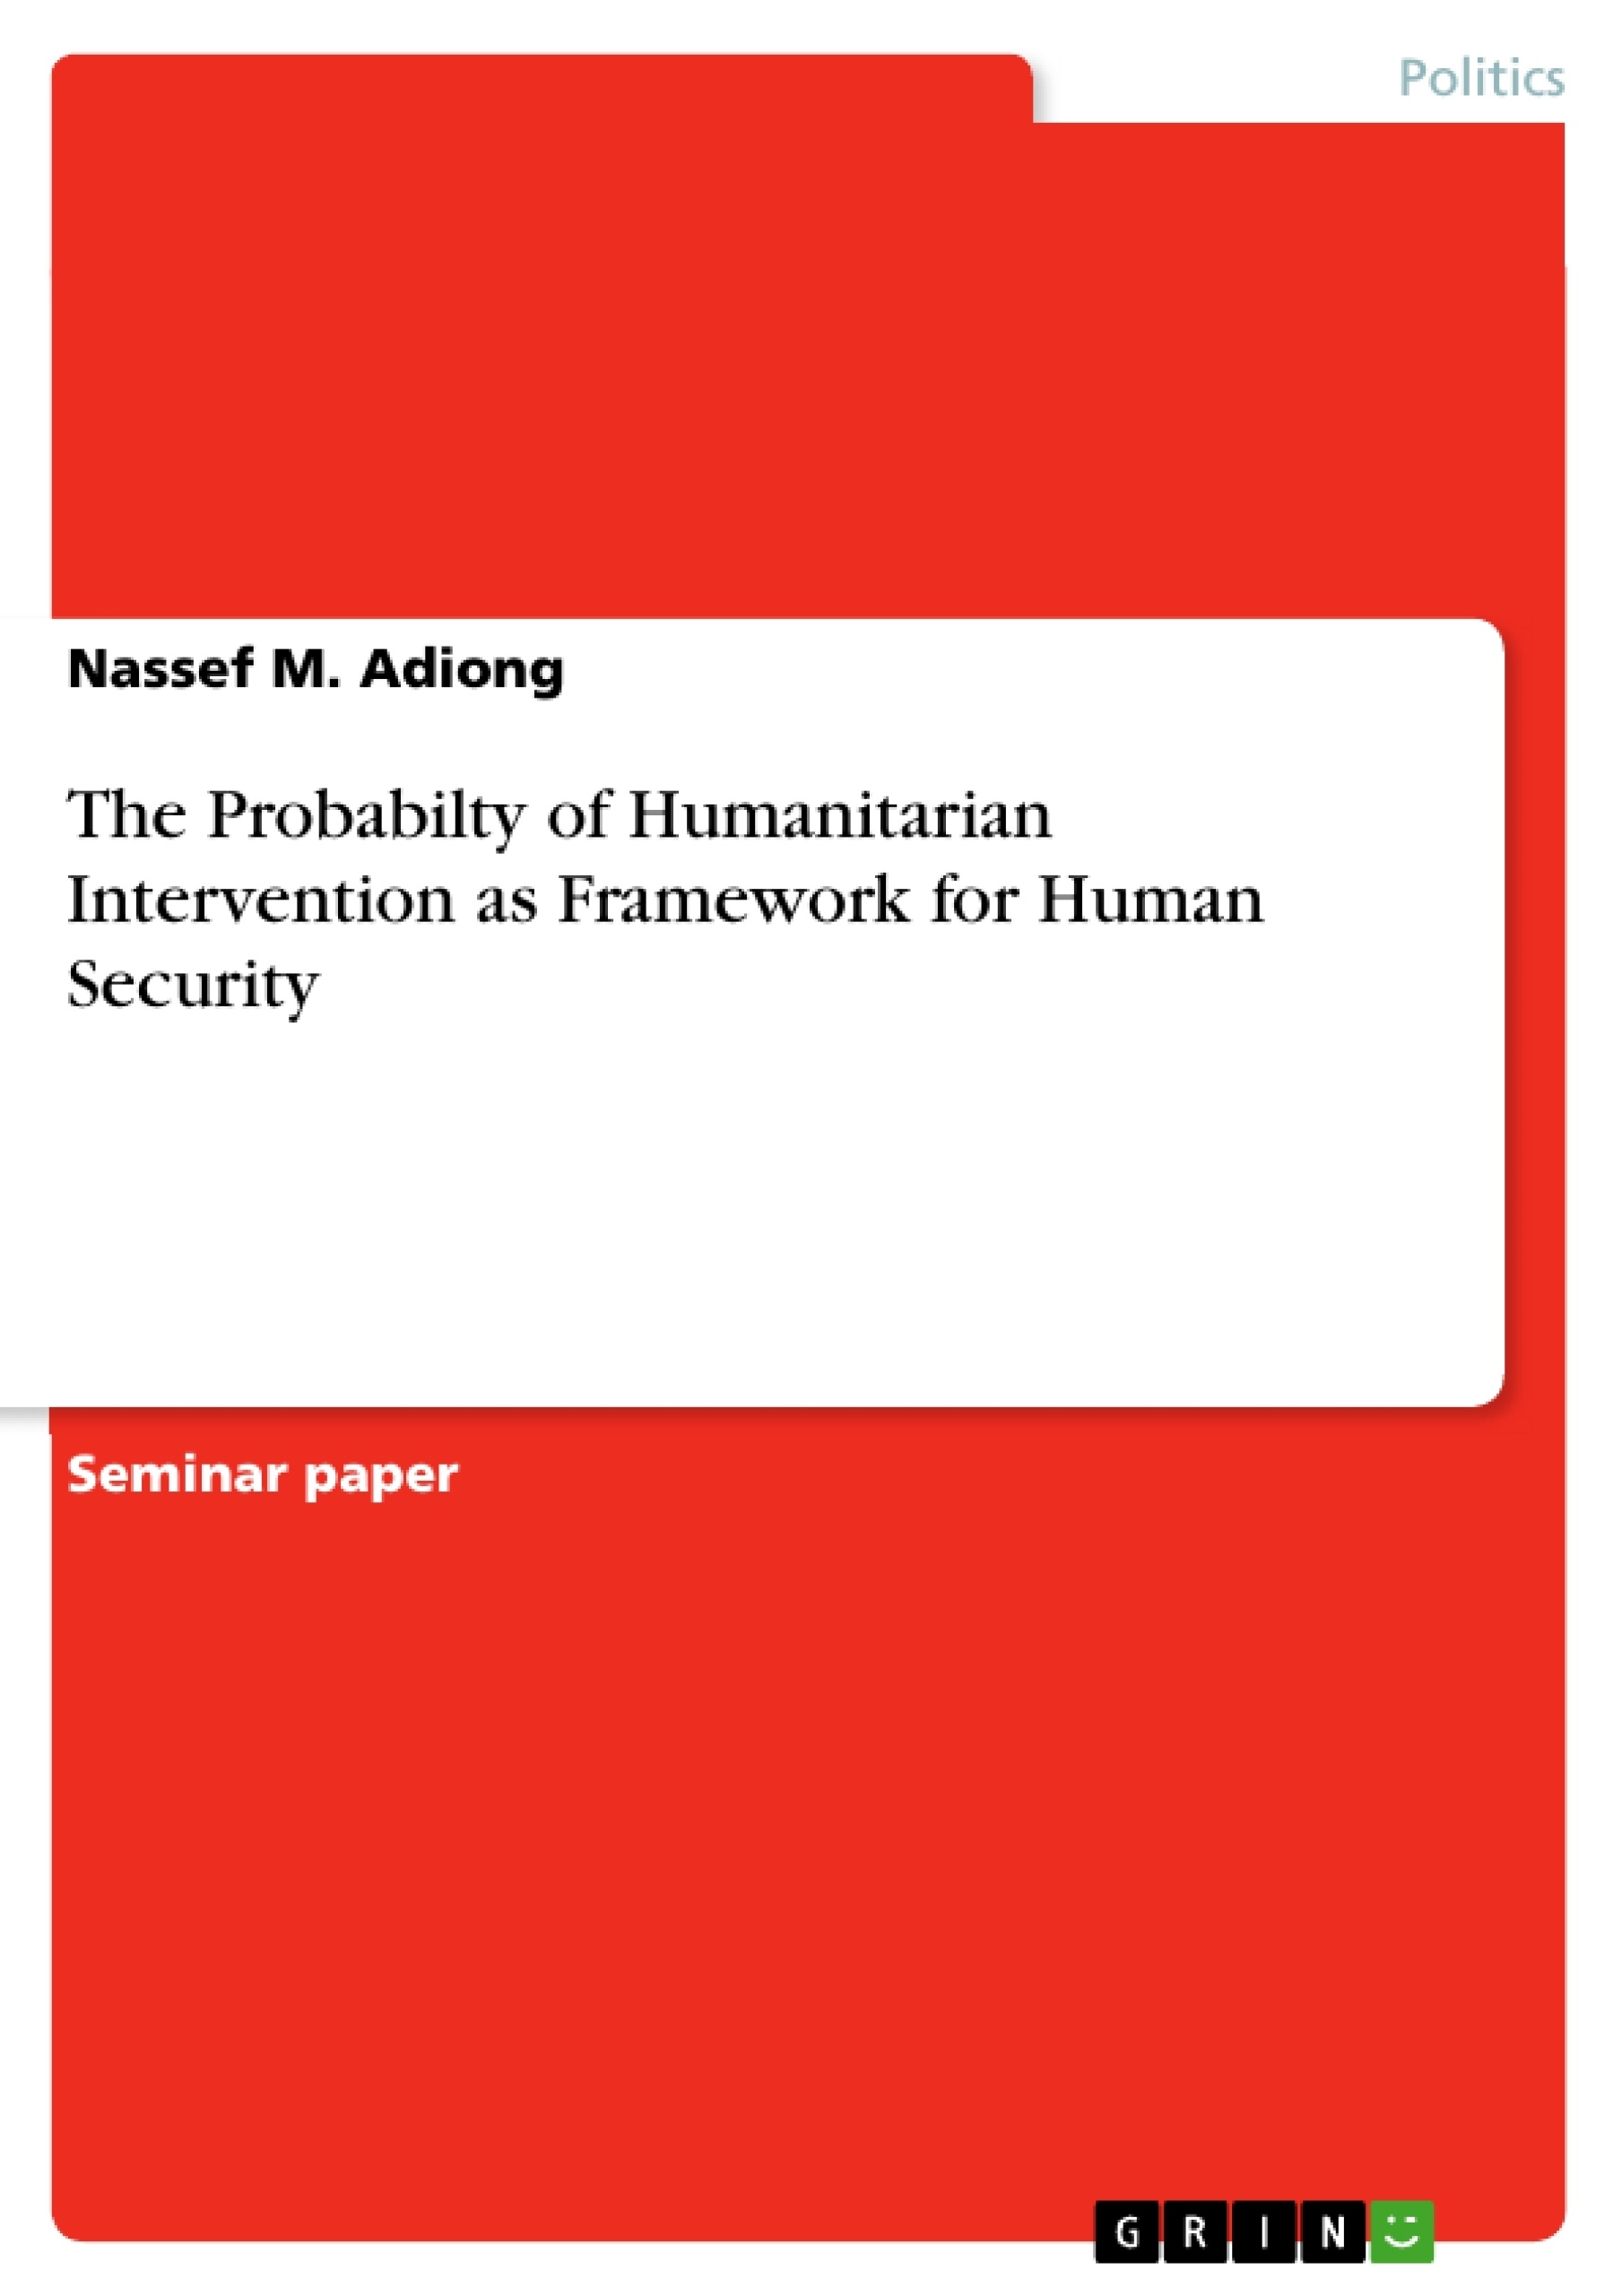 Titel: The Probabilty of Humanitarian Intervention as Framework for Human Security